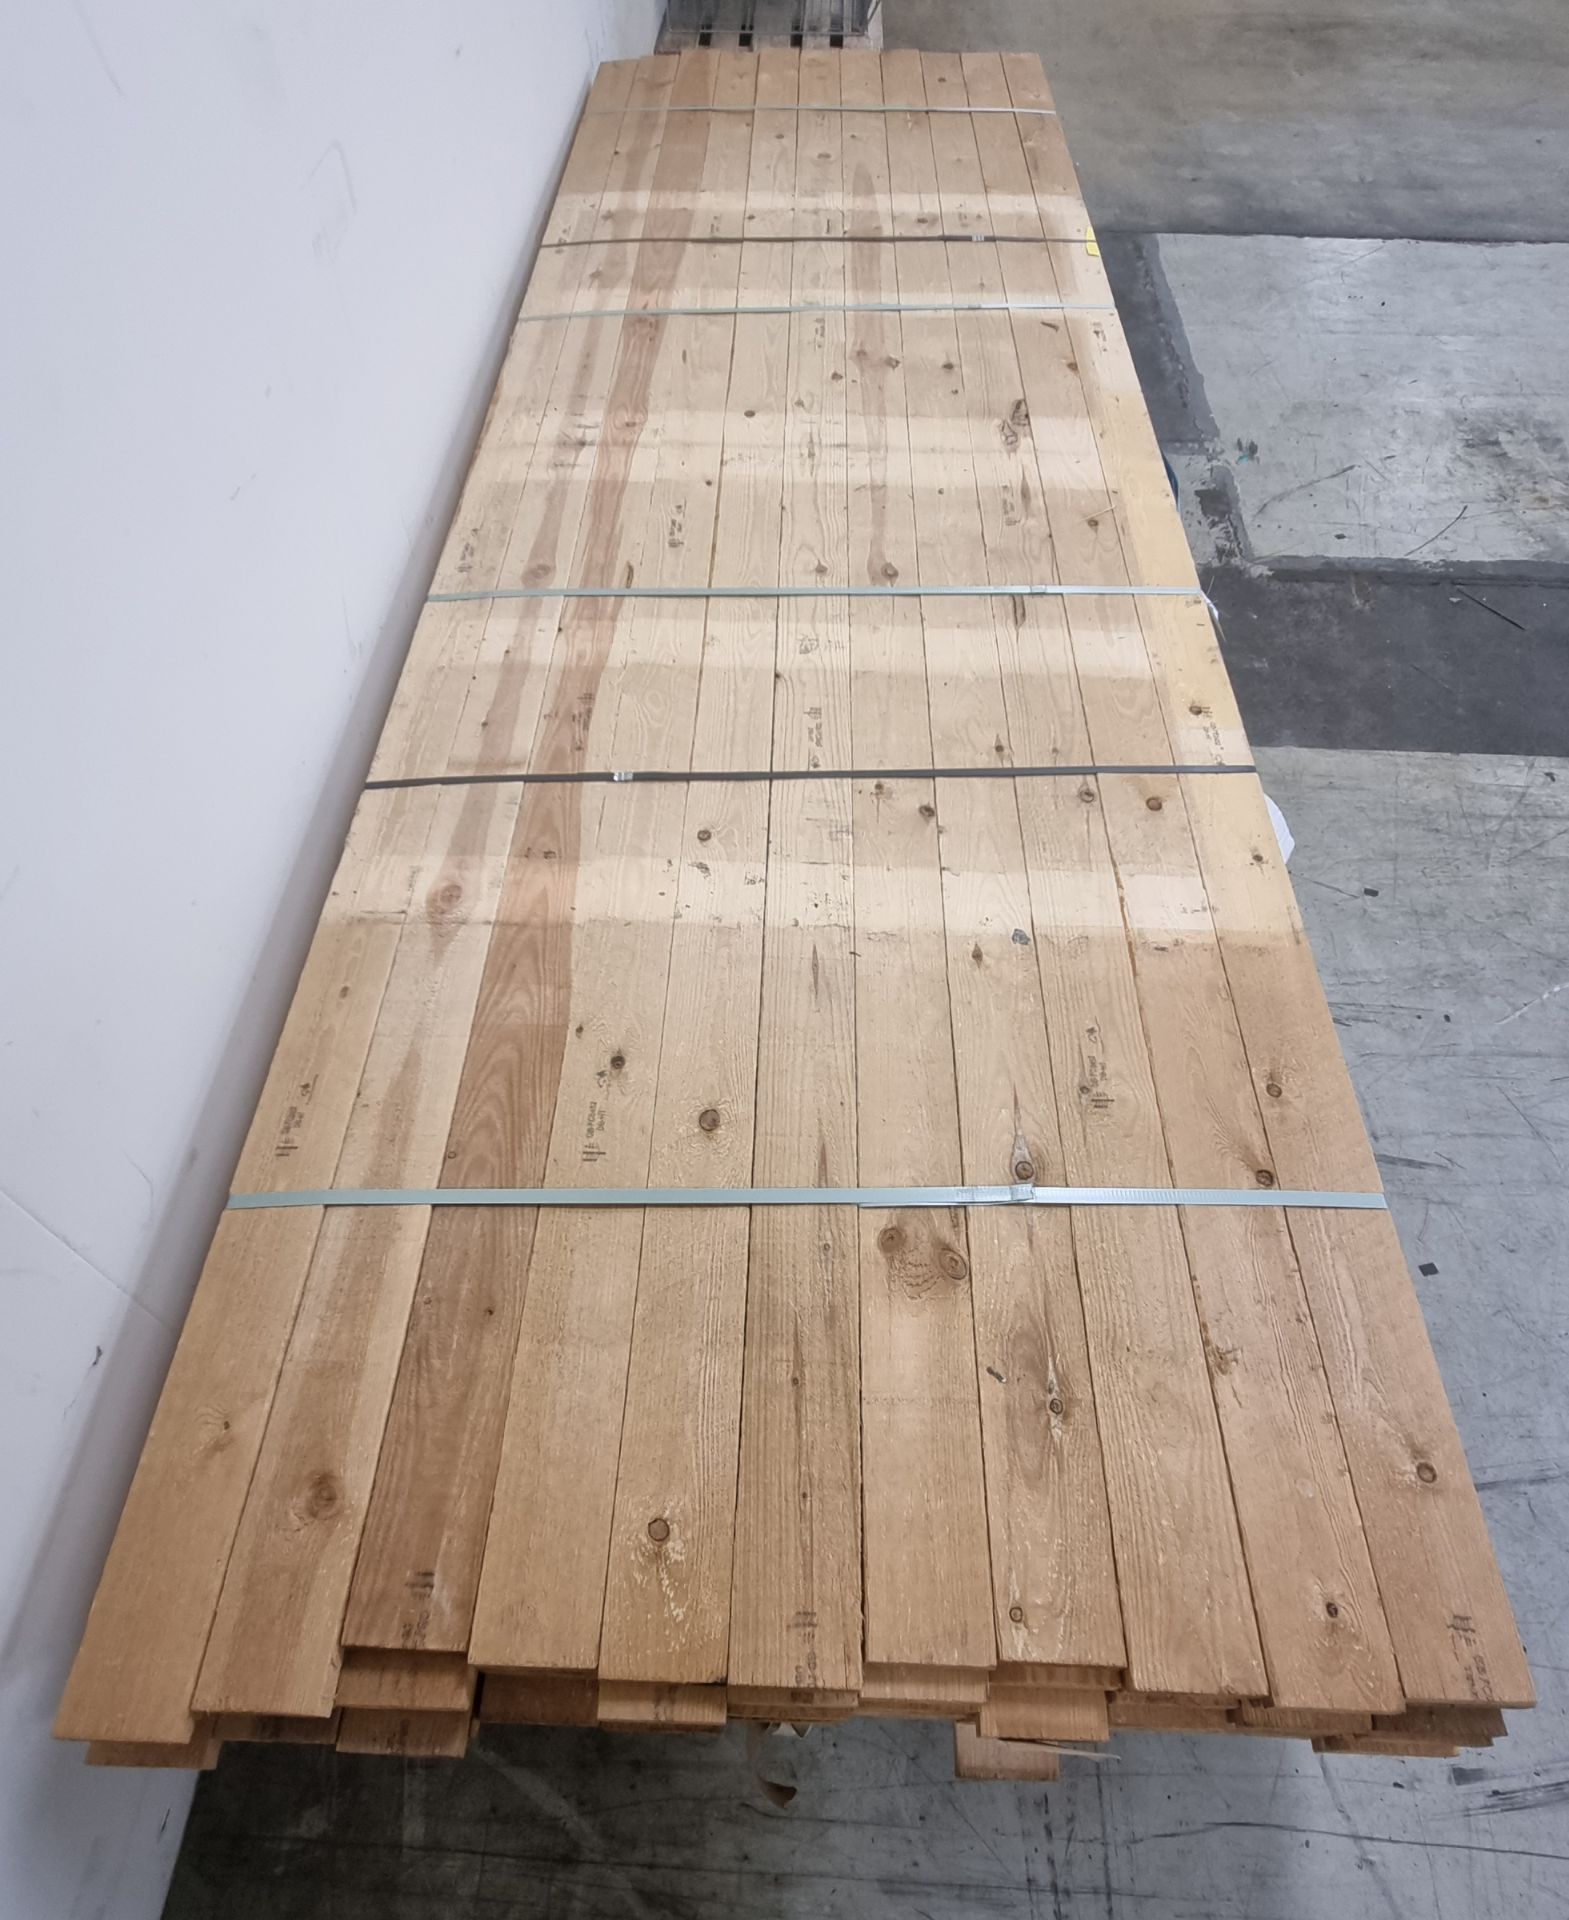 Pallet of 4"x1" (10x2.5cm) softwood, heat treated and debarked (GBFC-0452 DBHT) - L360cm - 154 pcs - Image 4 of 4